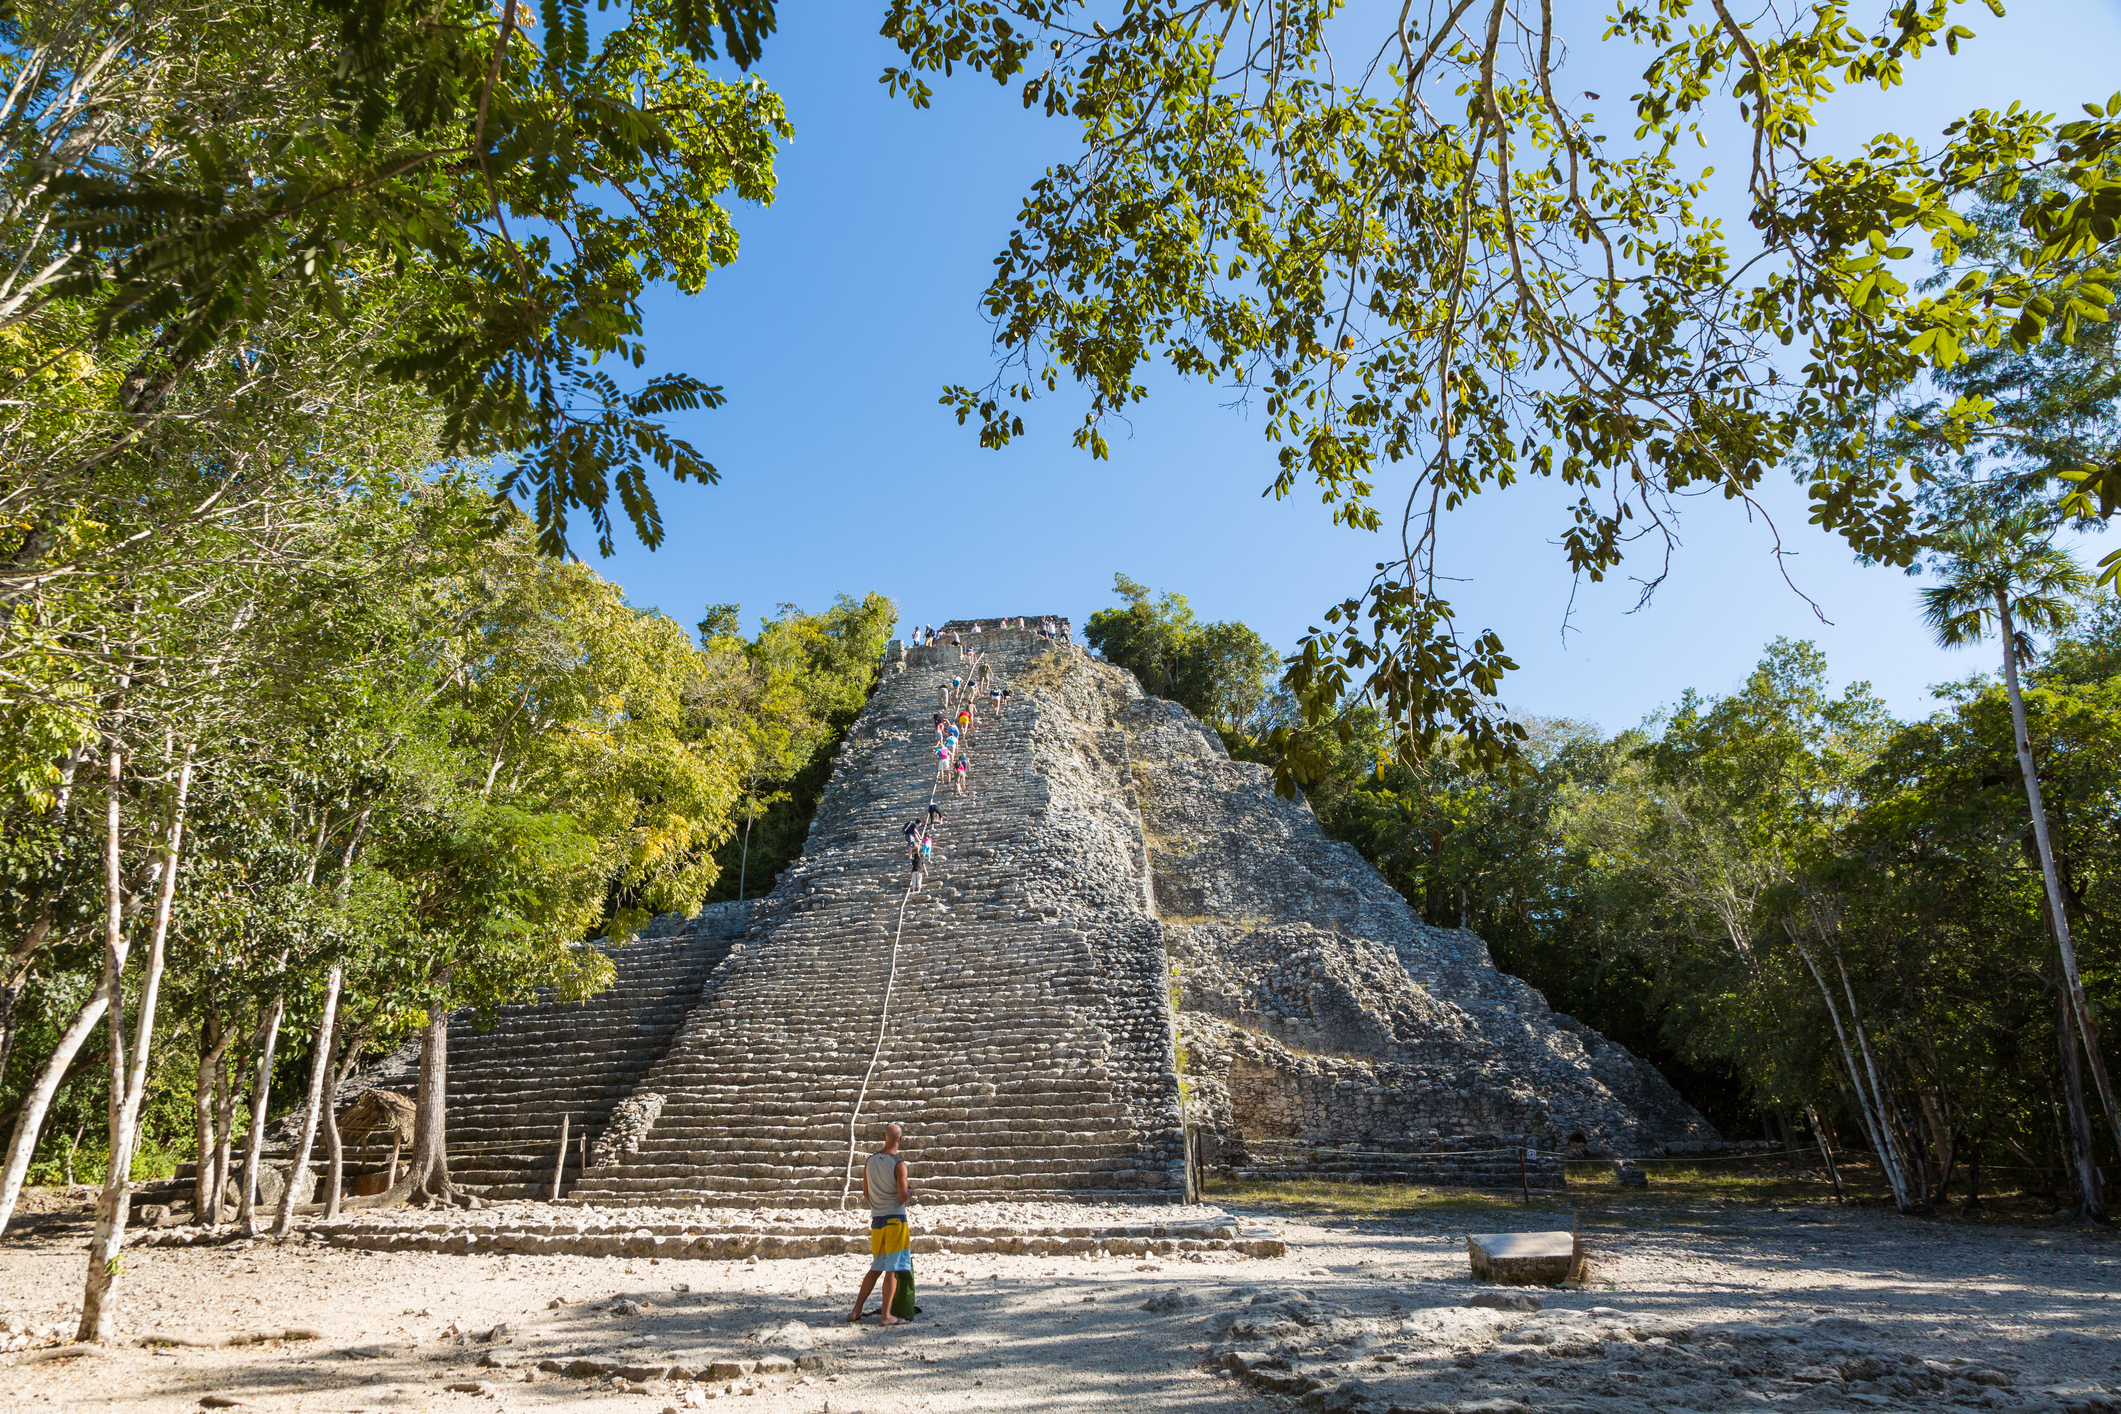 Ancient pyramid with visitors climbing and standing at the base amidst trees